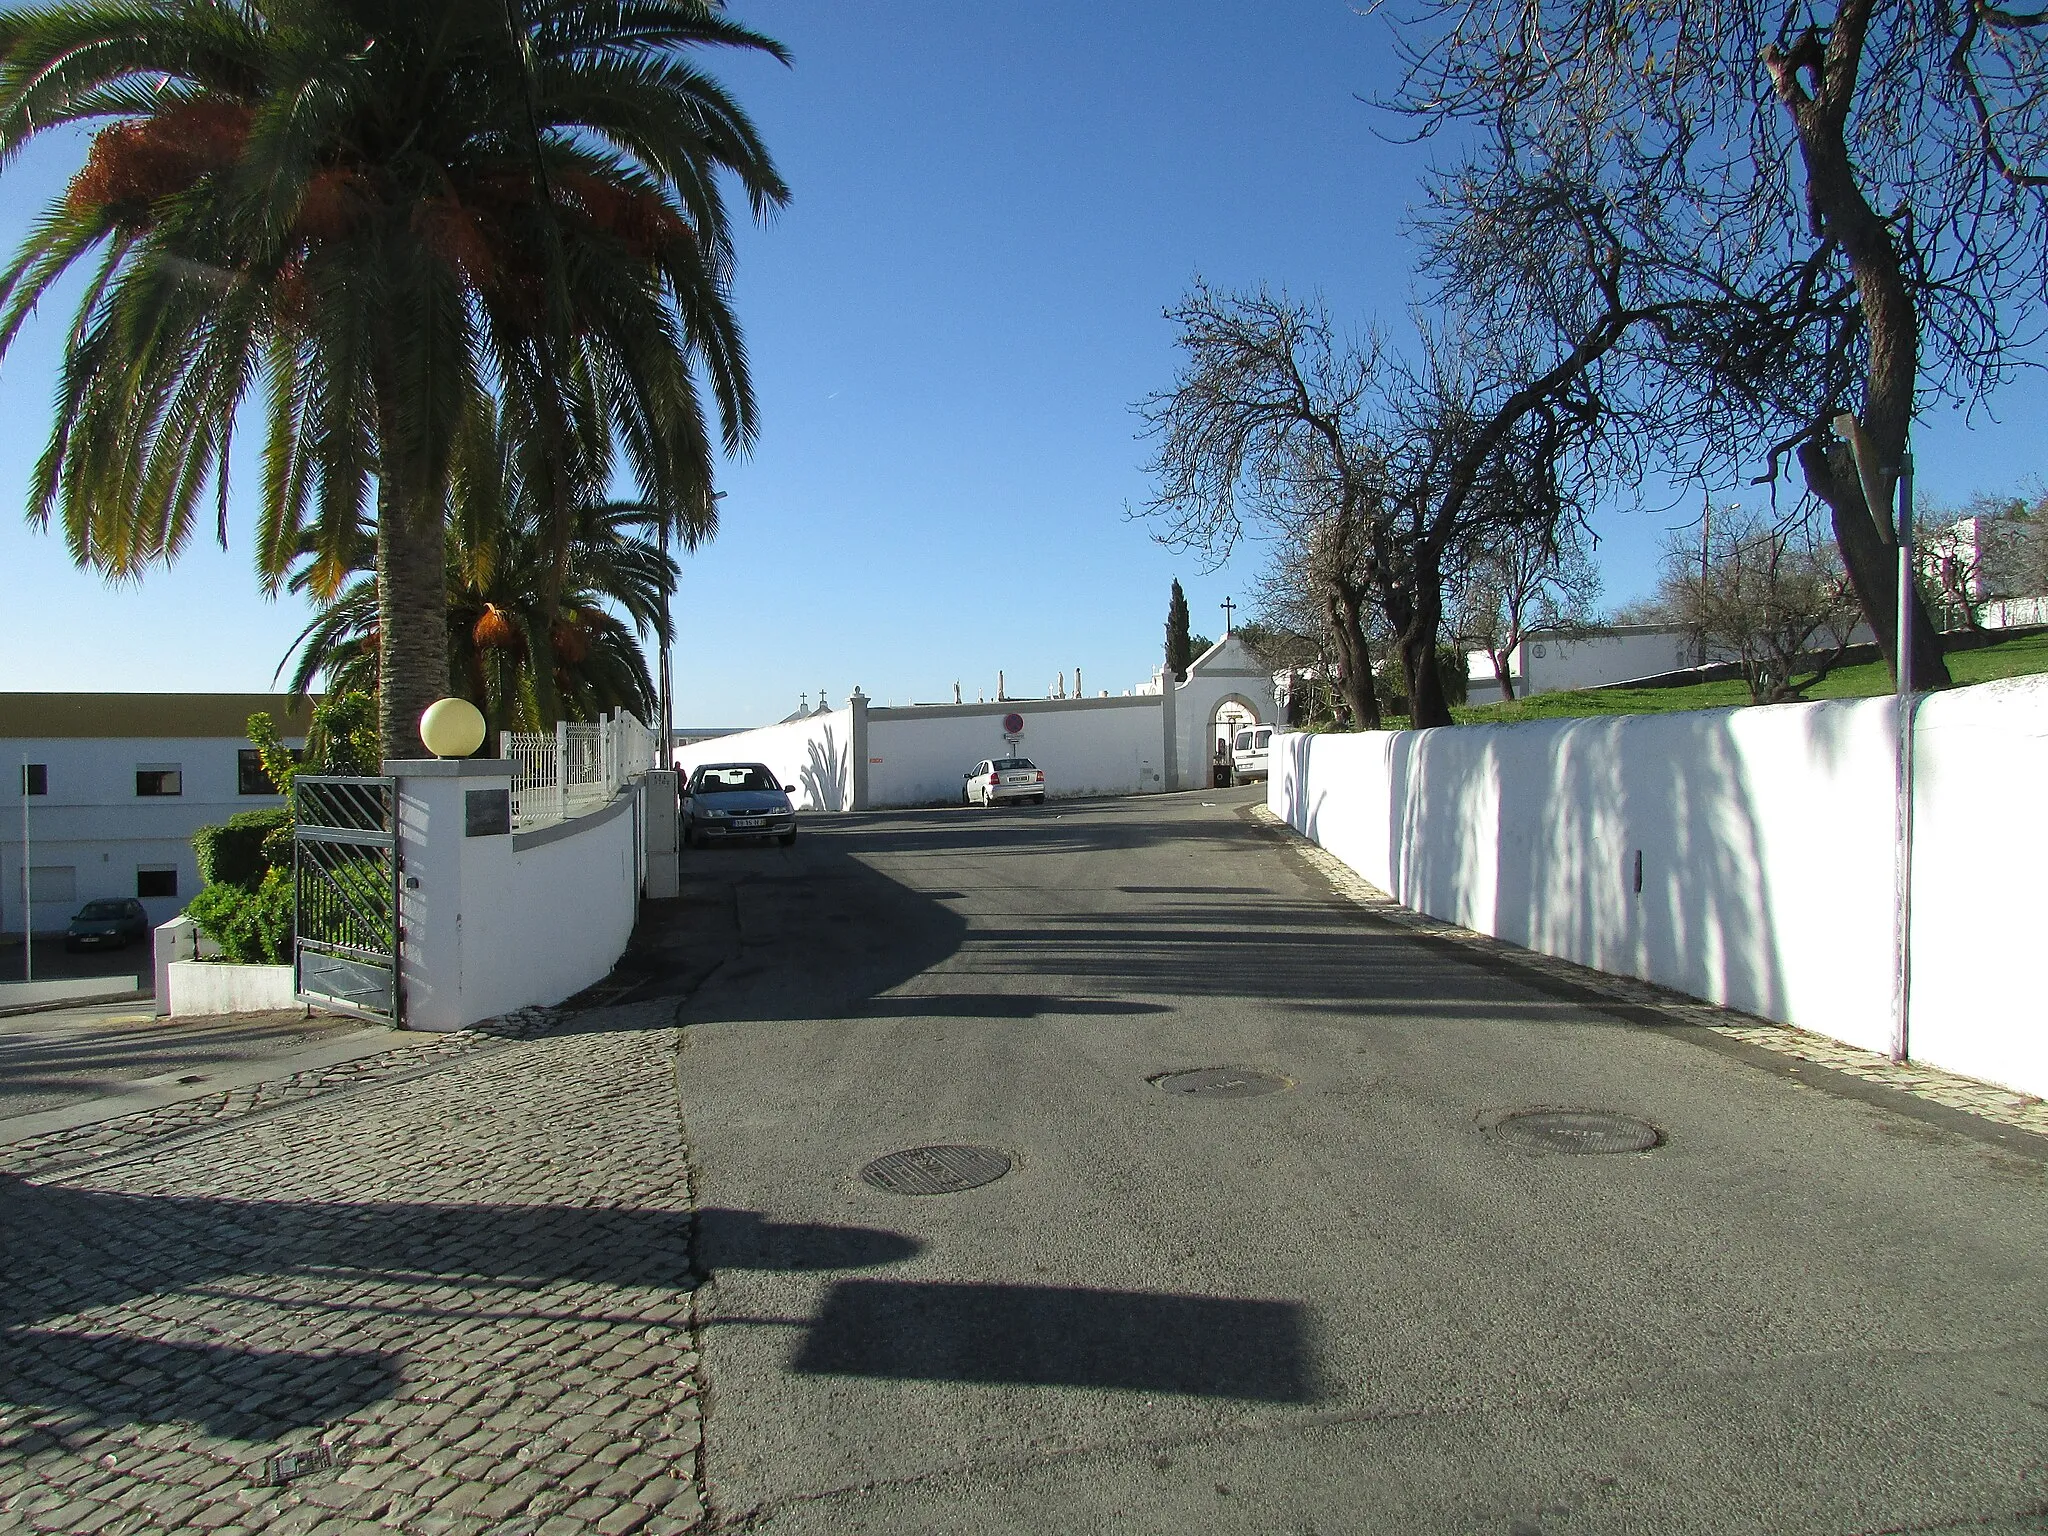 Photo showing: Looking south along the Rua da Misericórdia towards the cemetery within the village of Boliqueime, Algarve, Portugal.